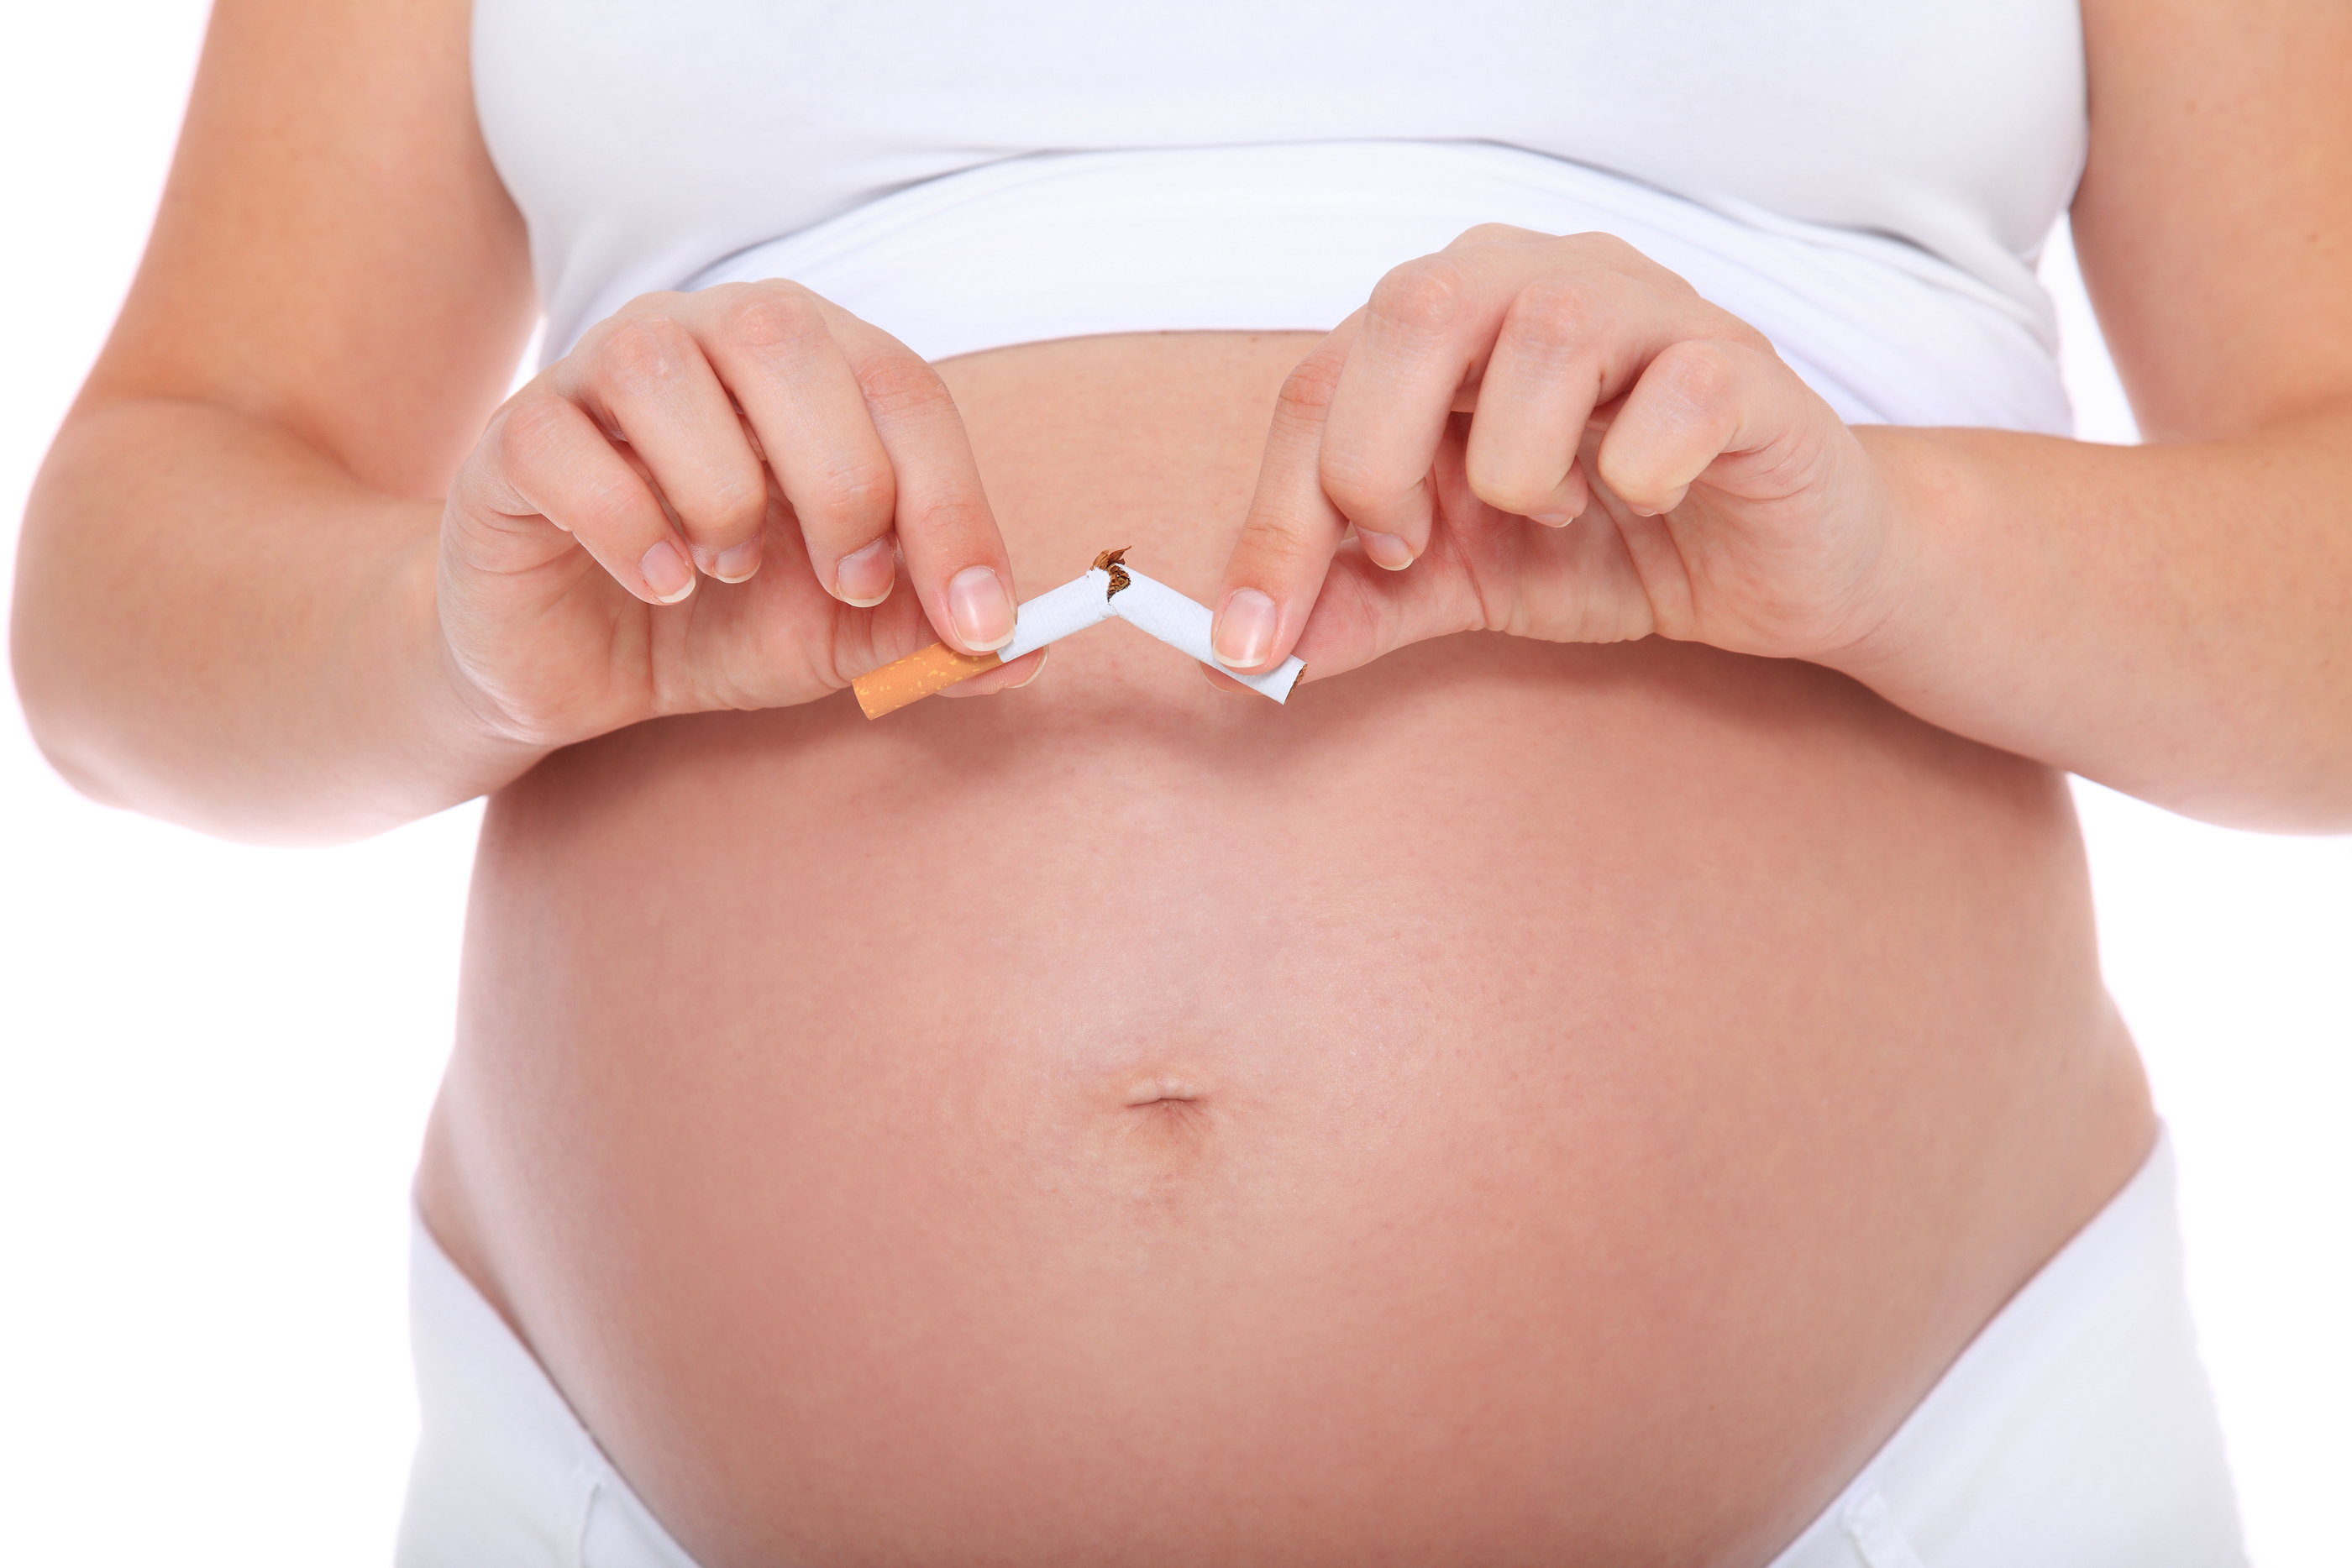 What truly motivates mothers to stop smoking in pregnancy?